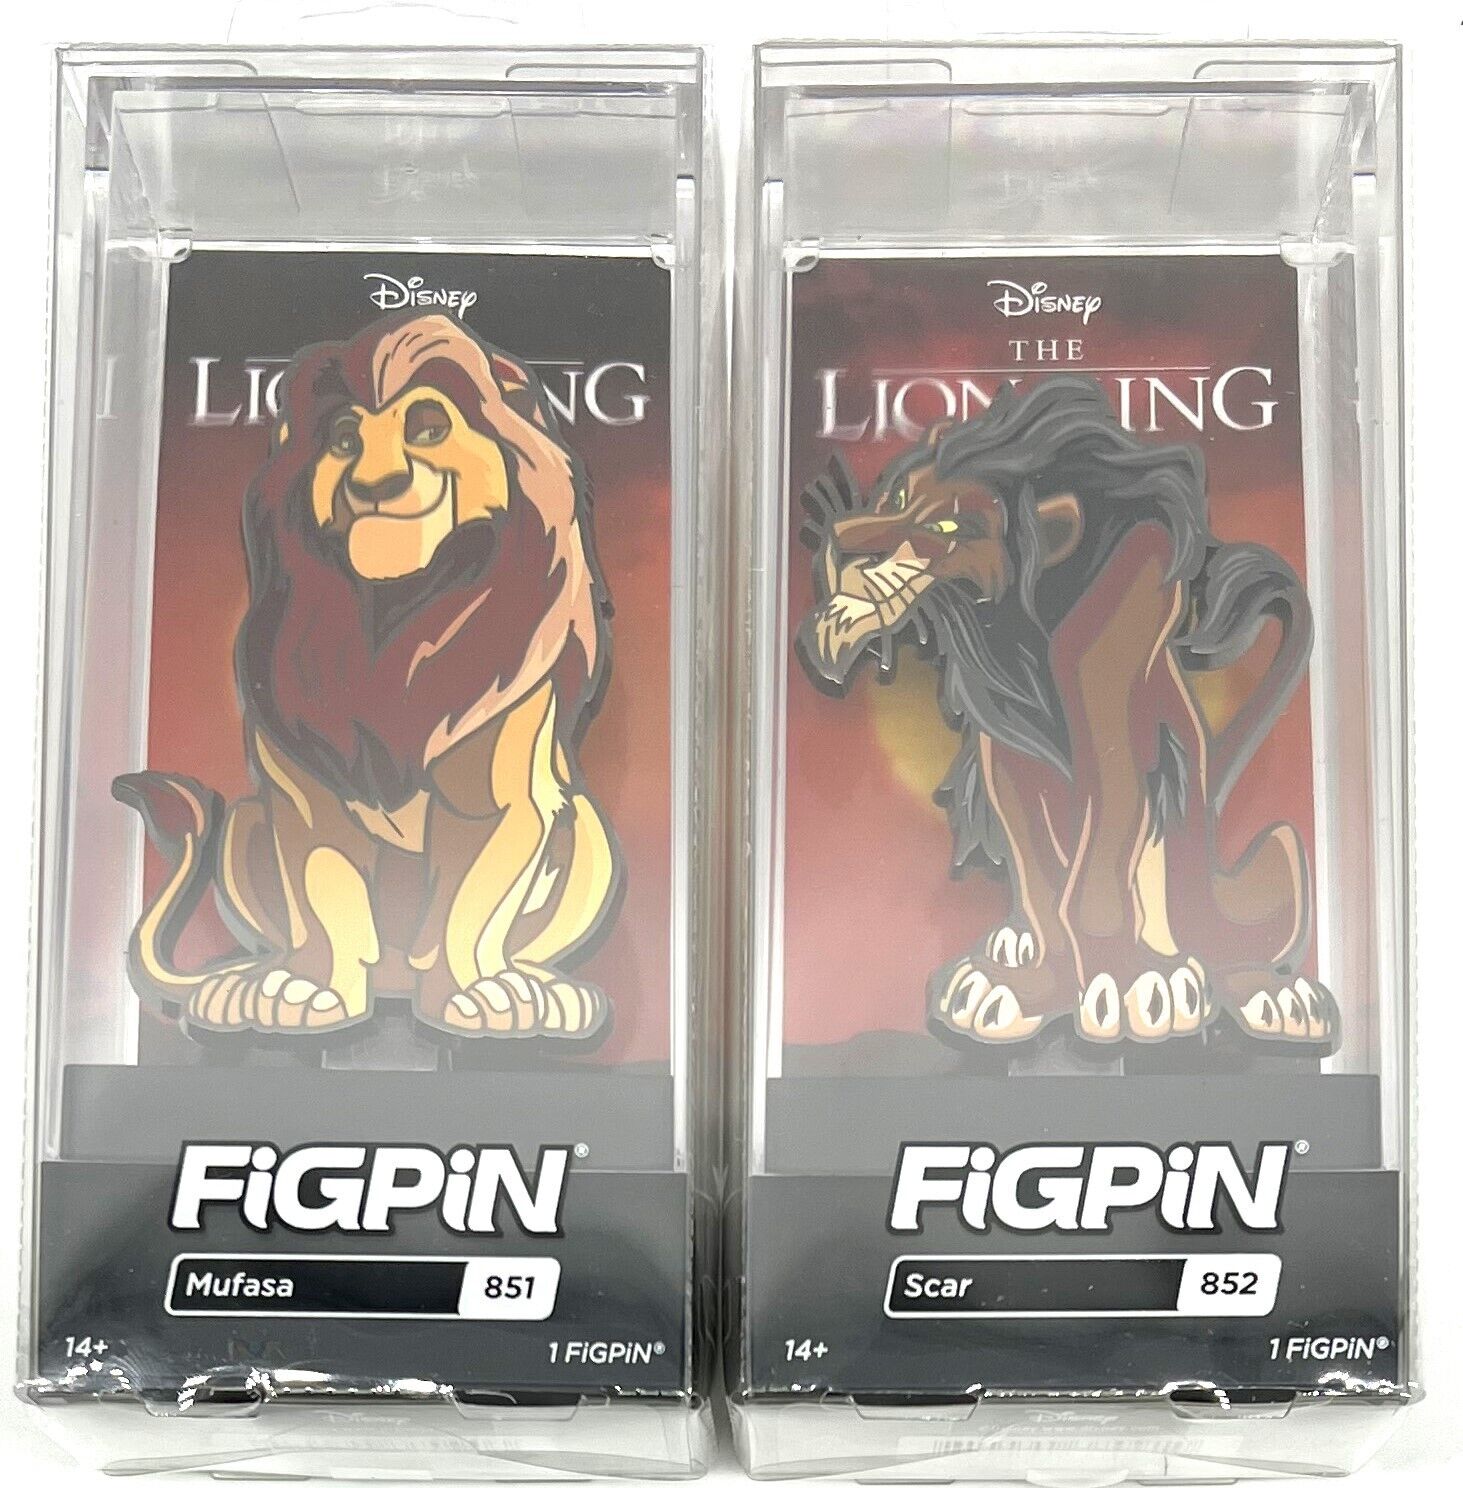 FiGPiN Disney The Lion King Mufasa #851 & Scar #852 Collectible Pins Set of 2